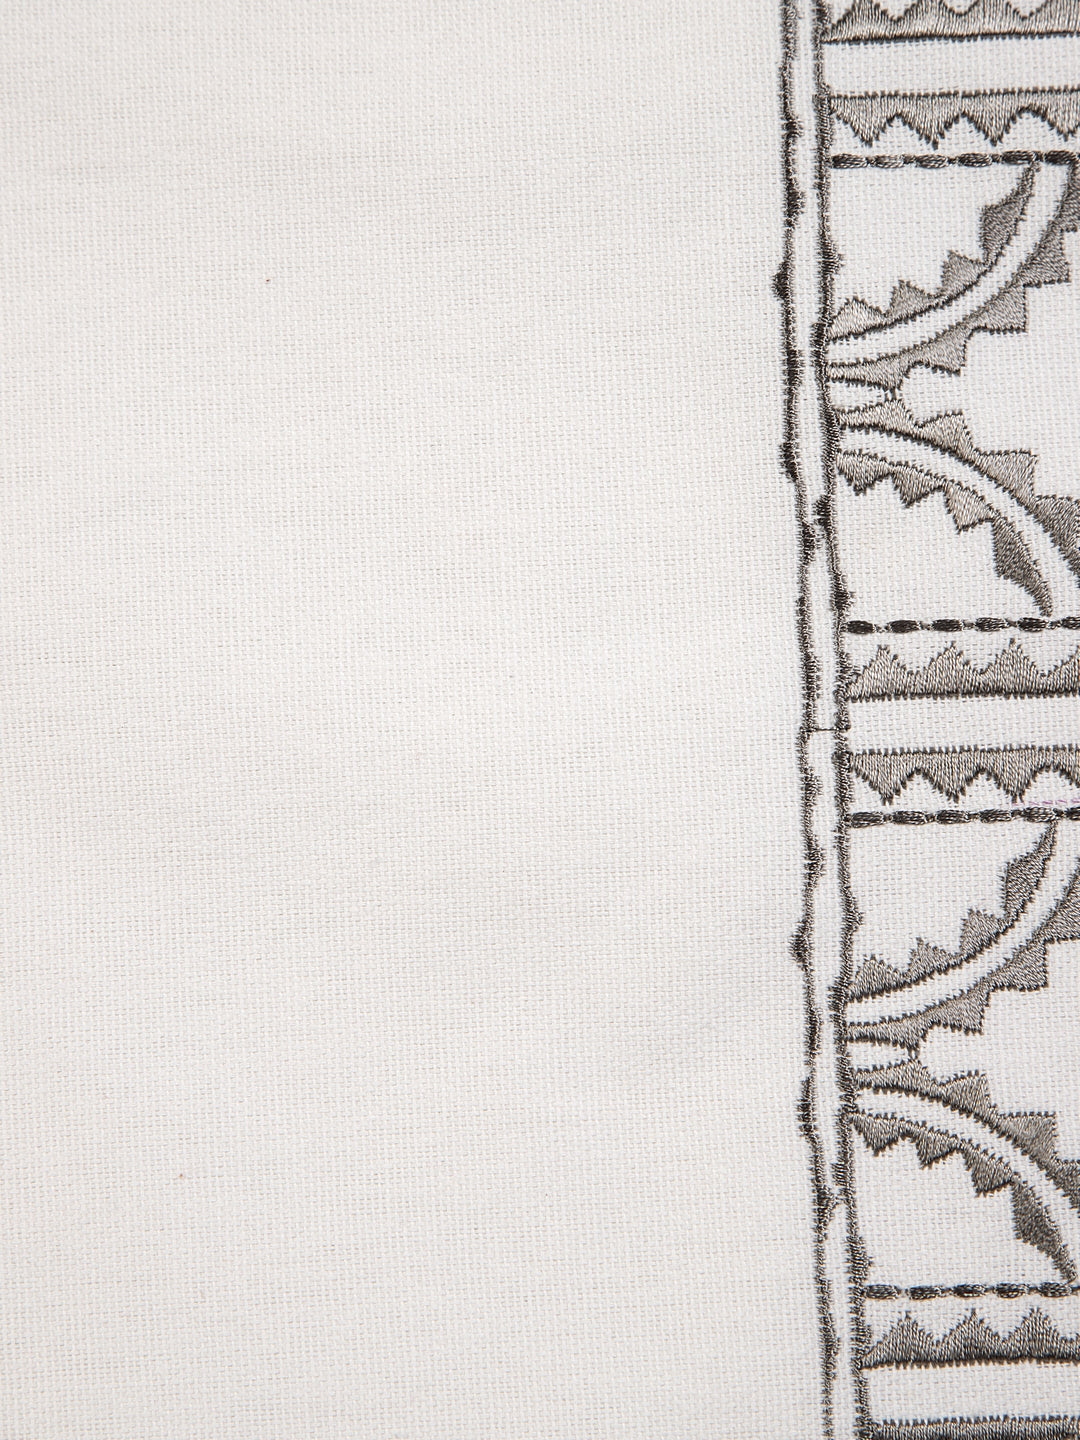 Set of 8 Embroidered Victorian Placemats